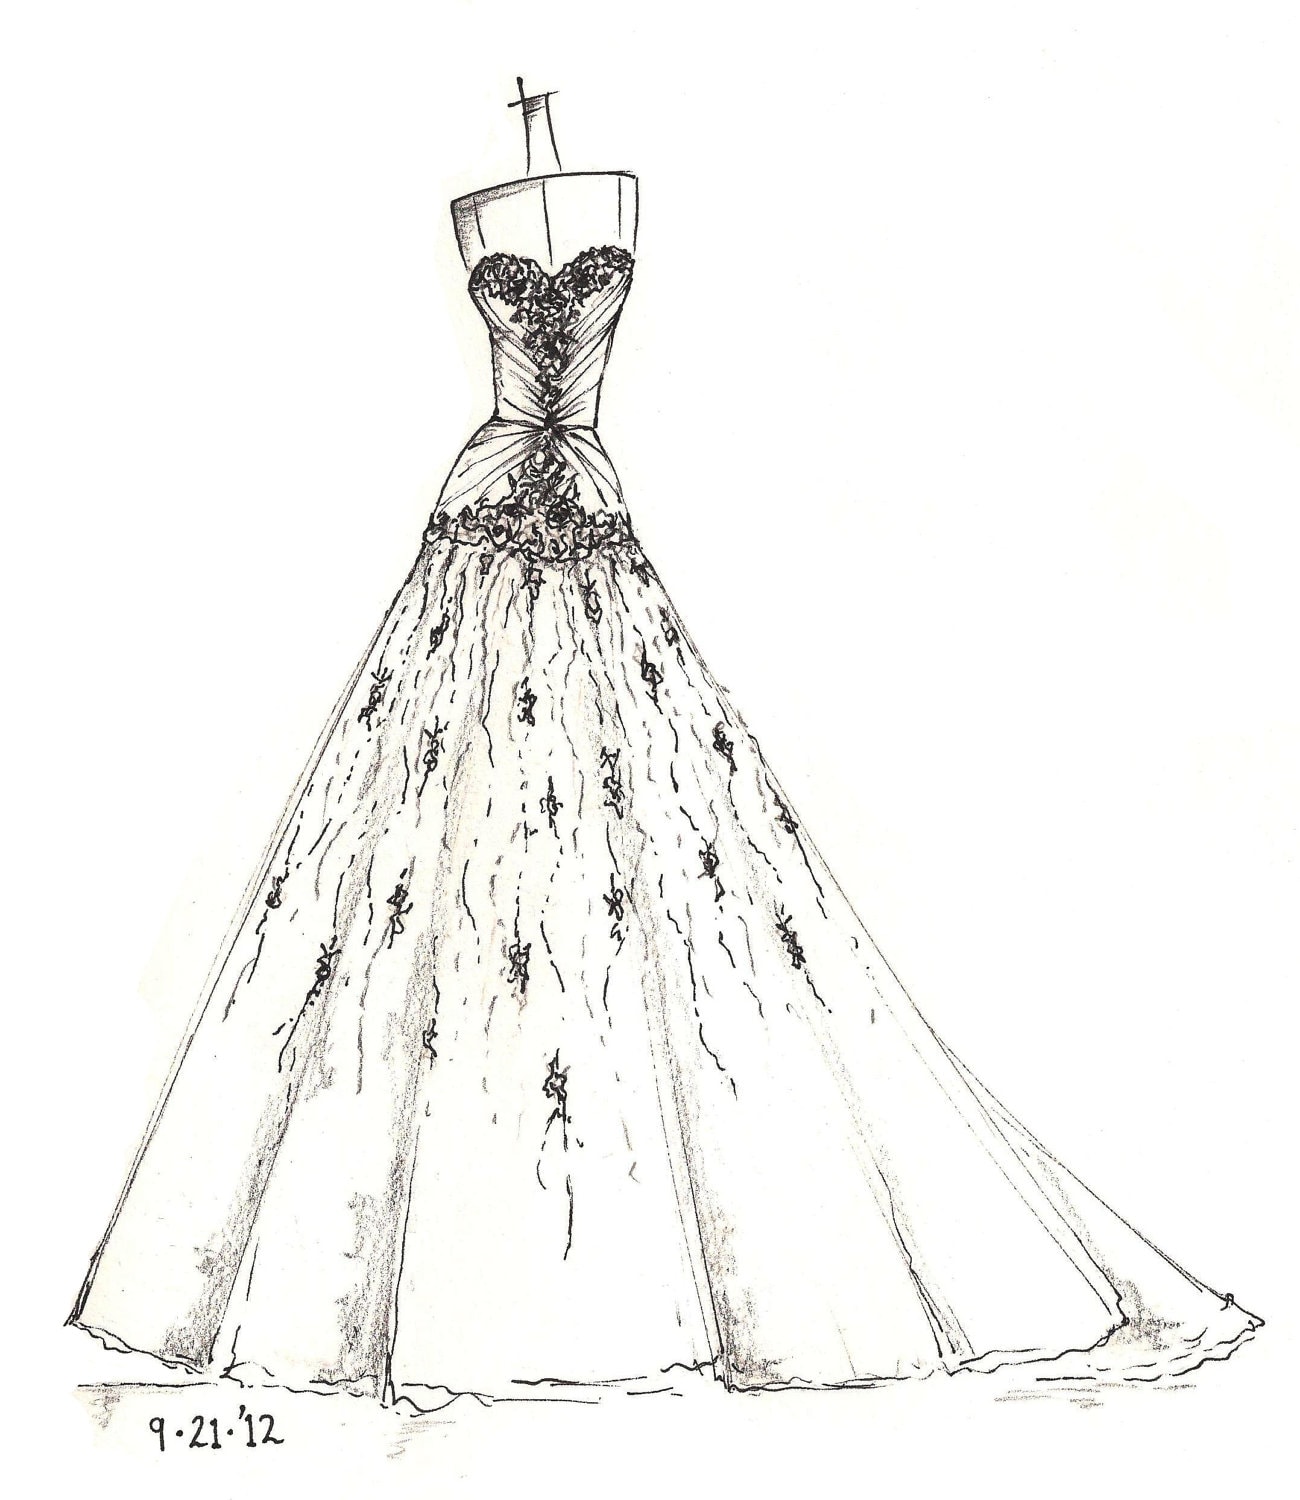 custom gown sketch great gift for anniversary or shower